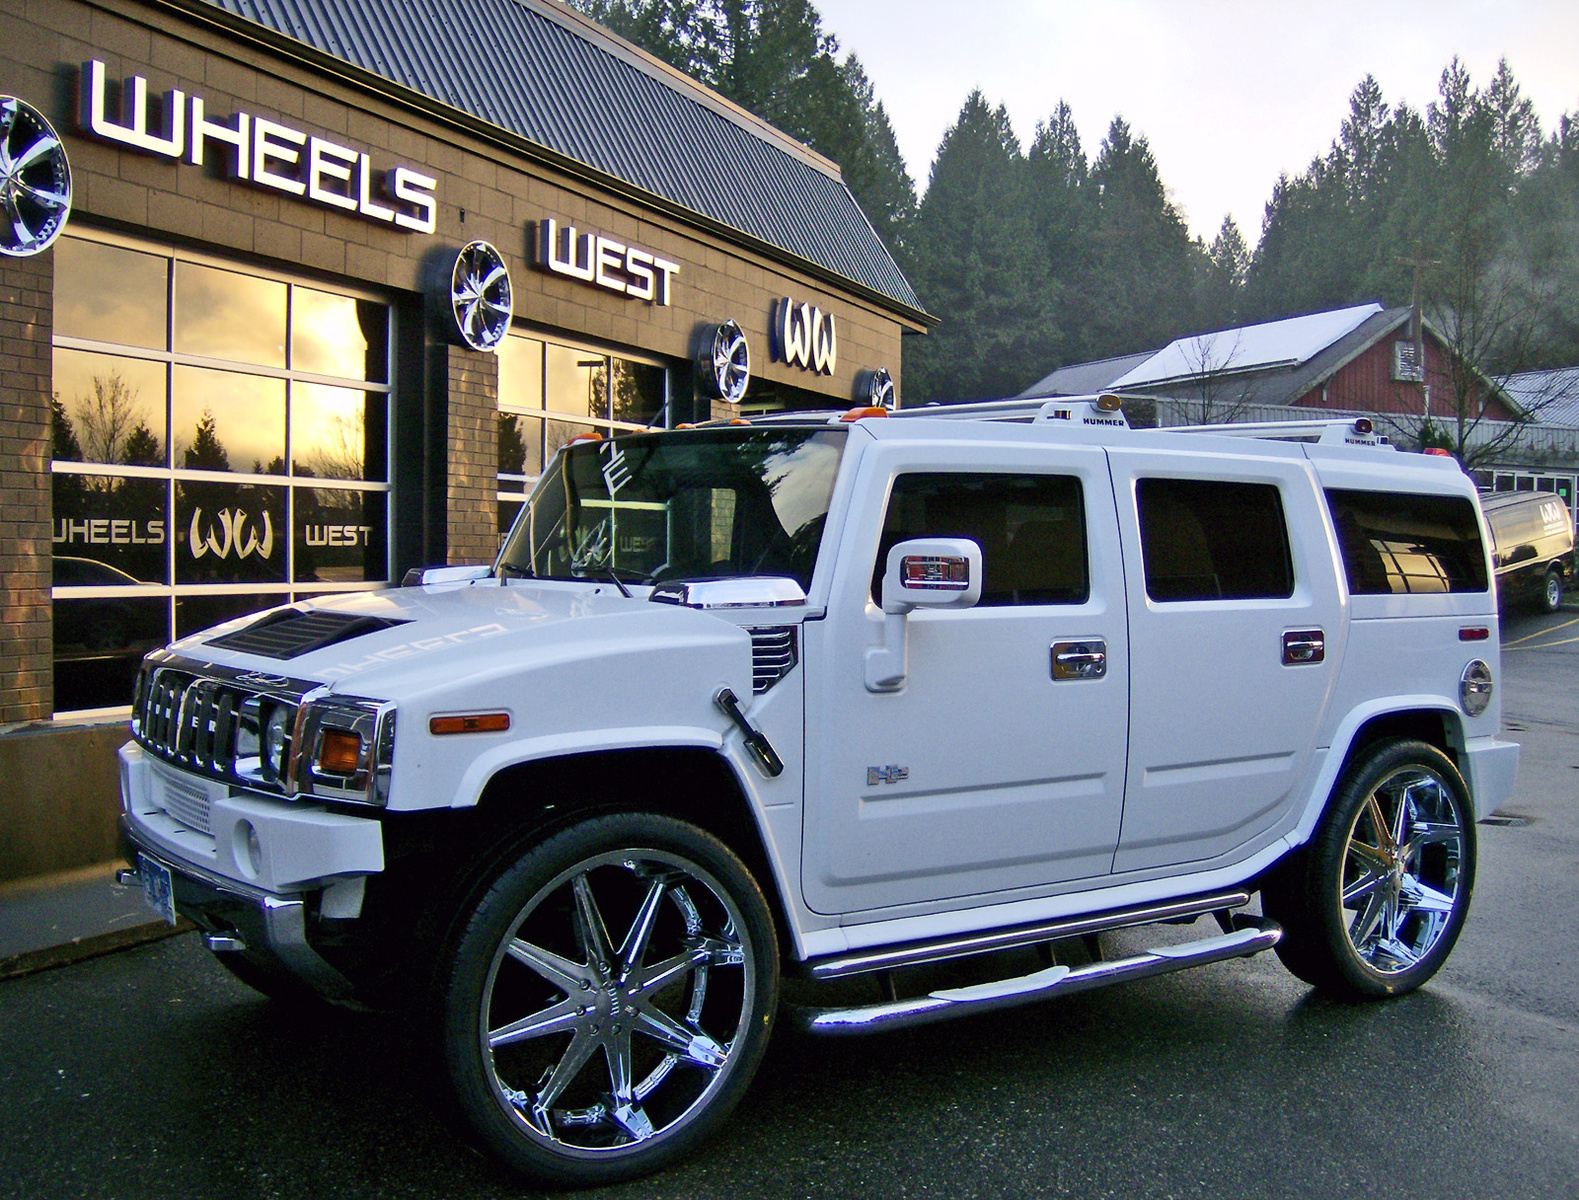 Wallpapers Of Hummer Car